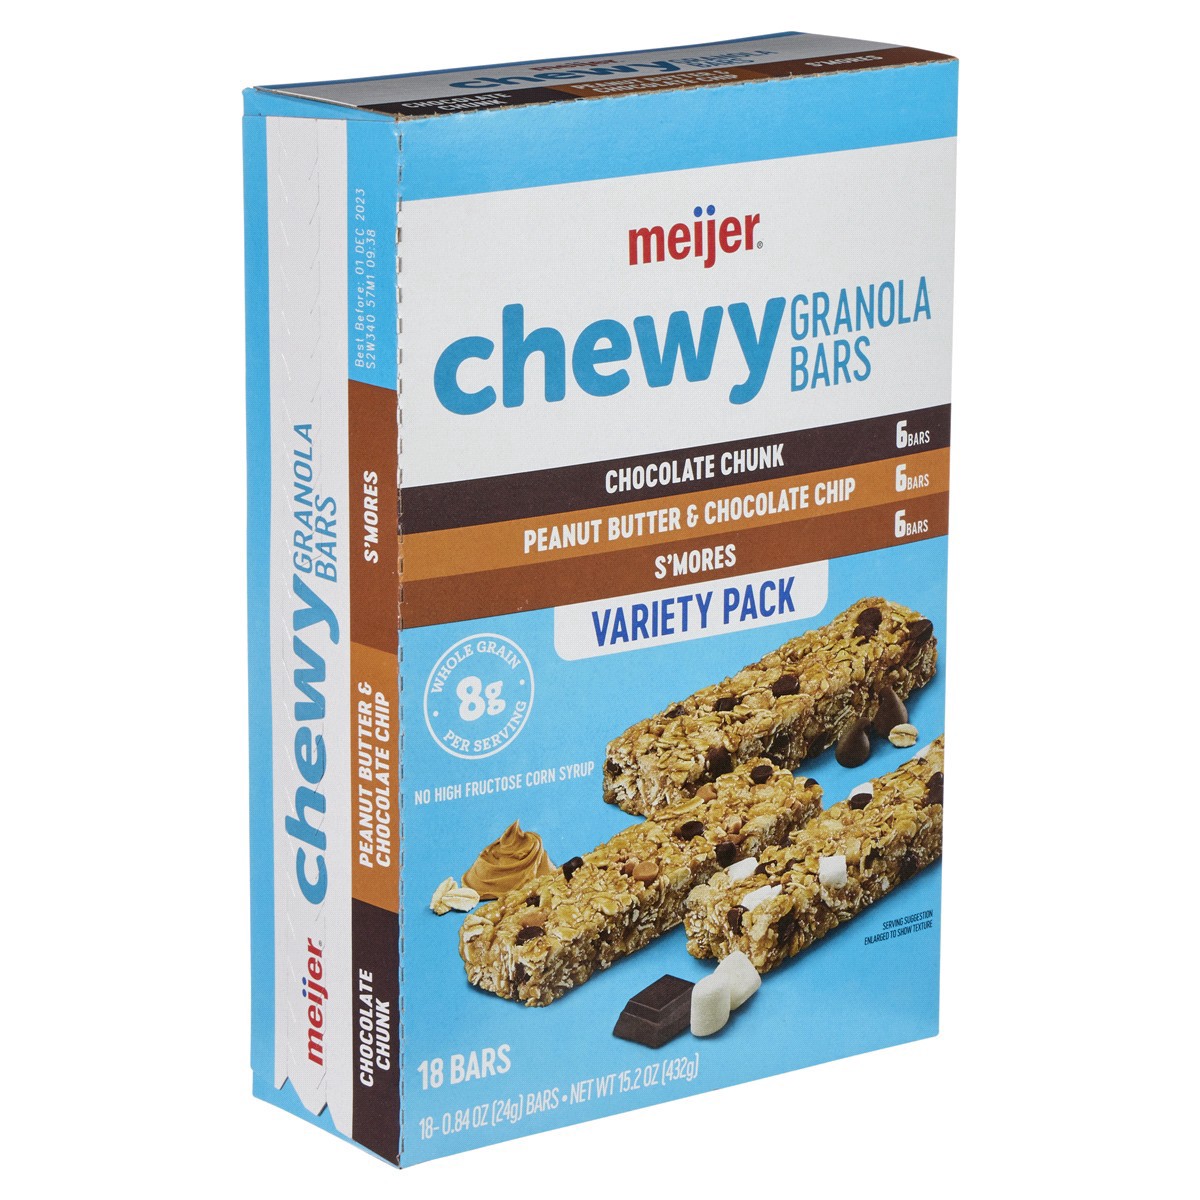 slide 9 of 29, Meijer Chewy Granola Bar Variety Pack, 18 ct